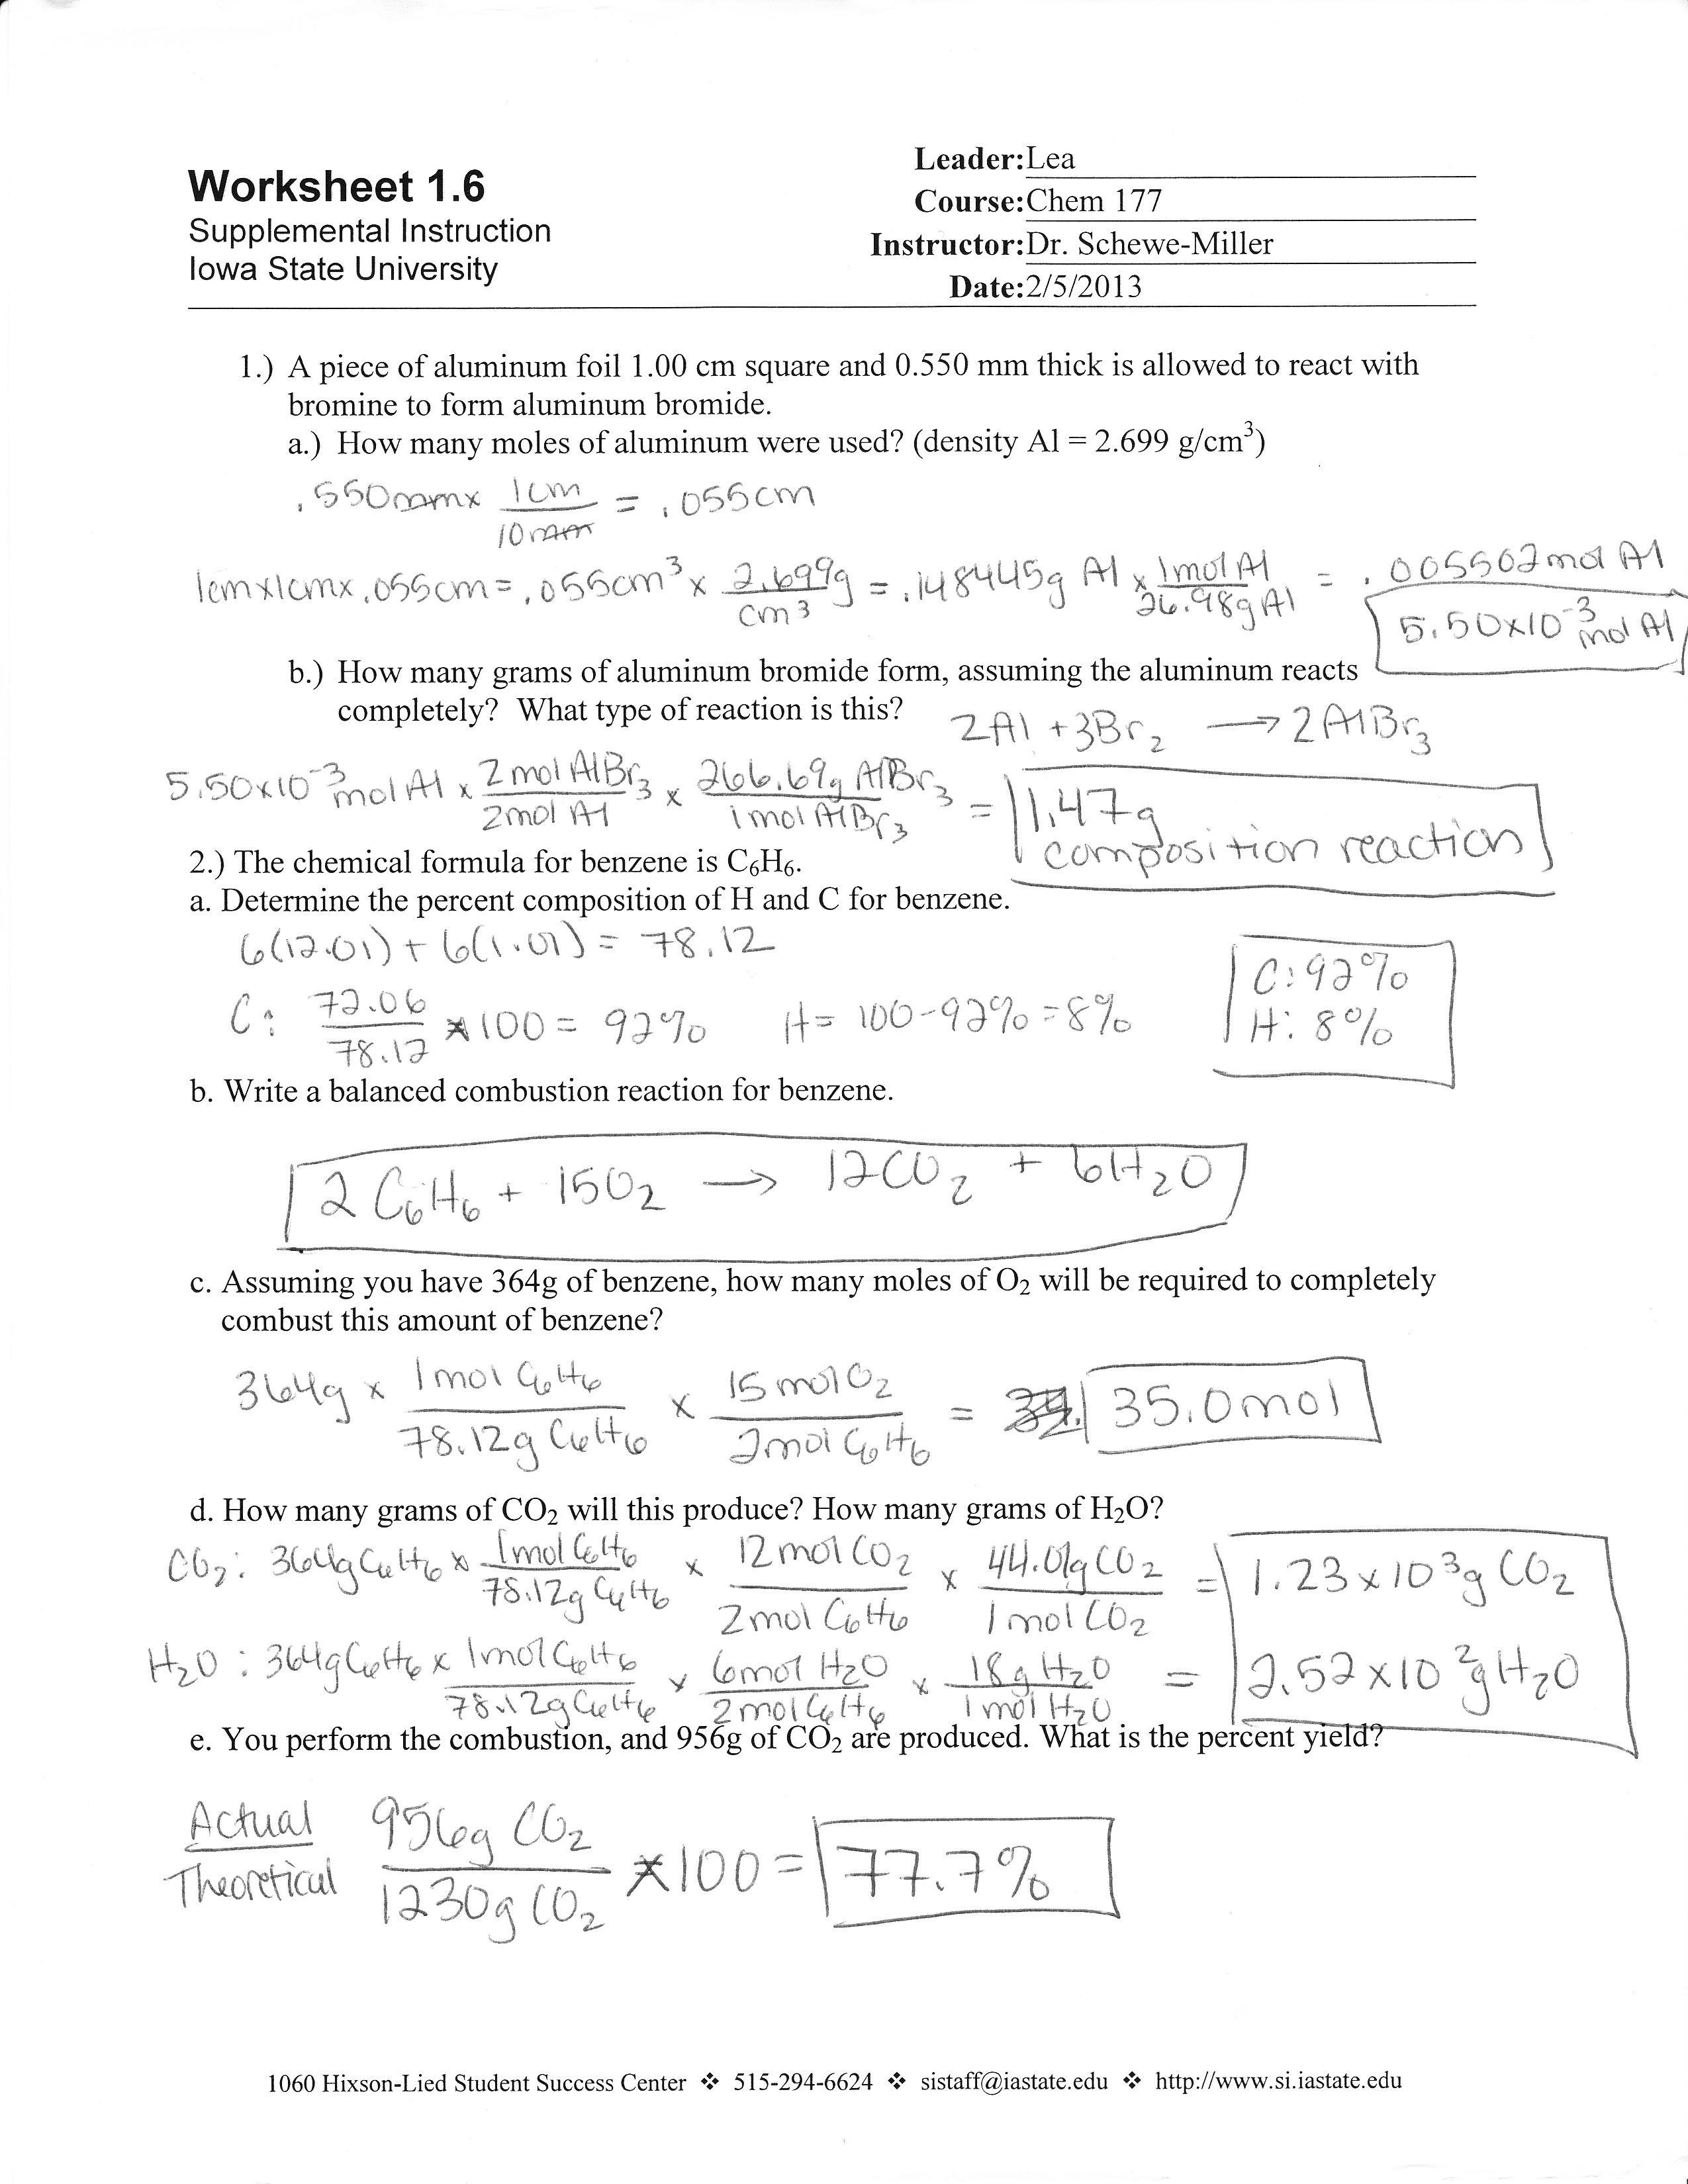 10 Best Images Of Stoichiometry Worksheet 2 Answer Key Chemistry Stoichiometry Worksheet 